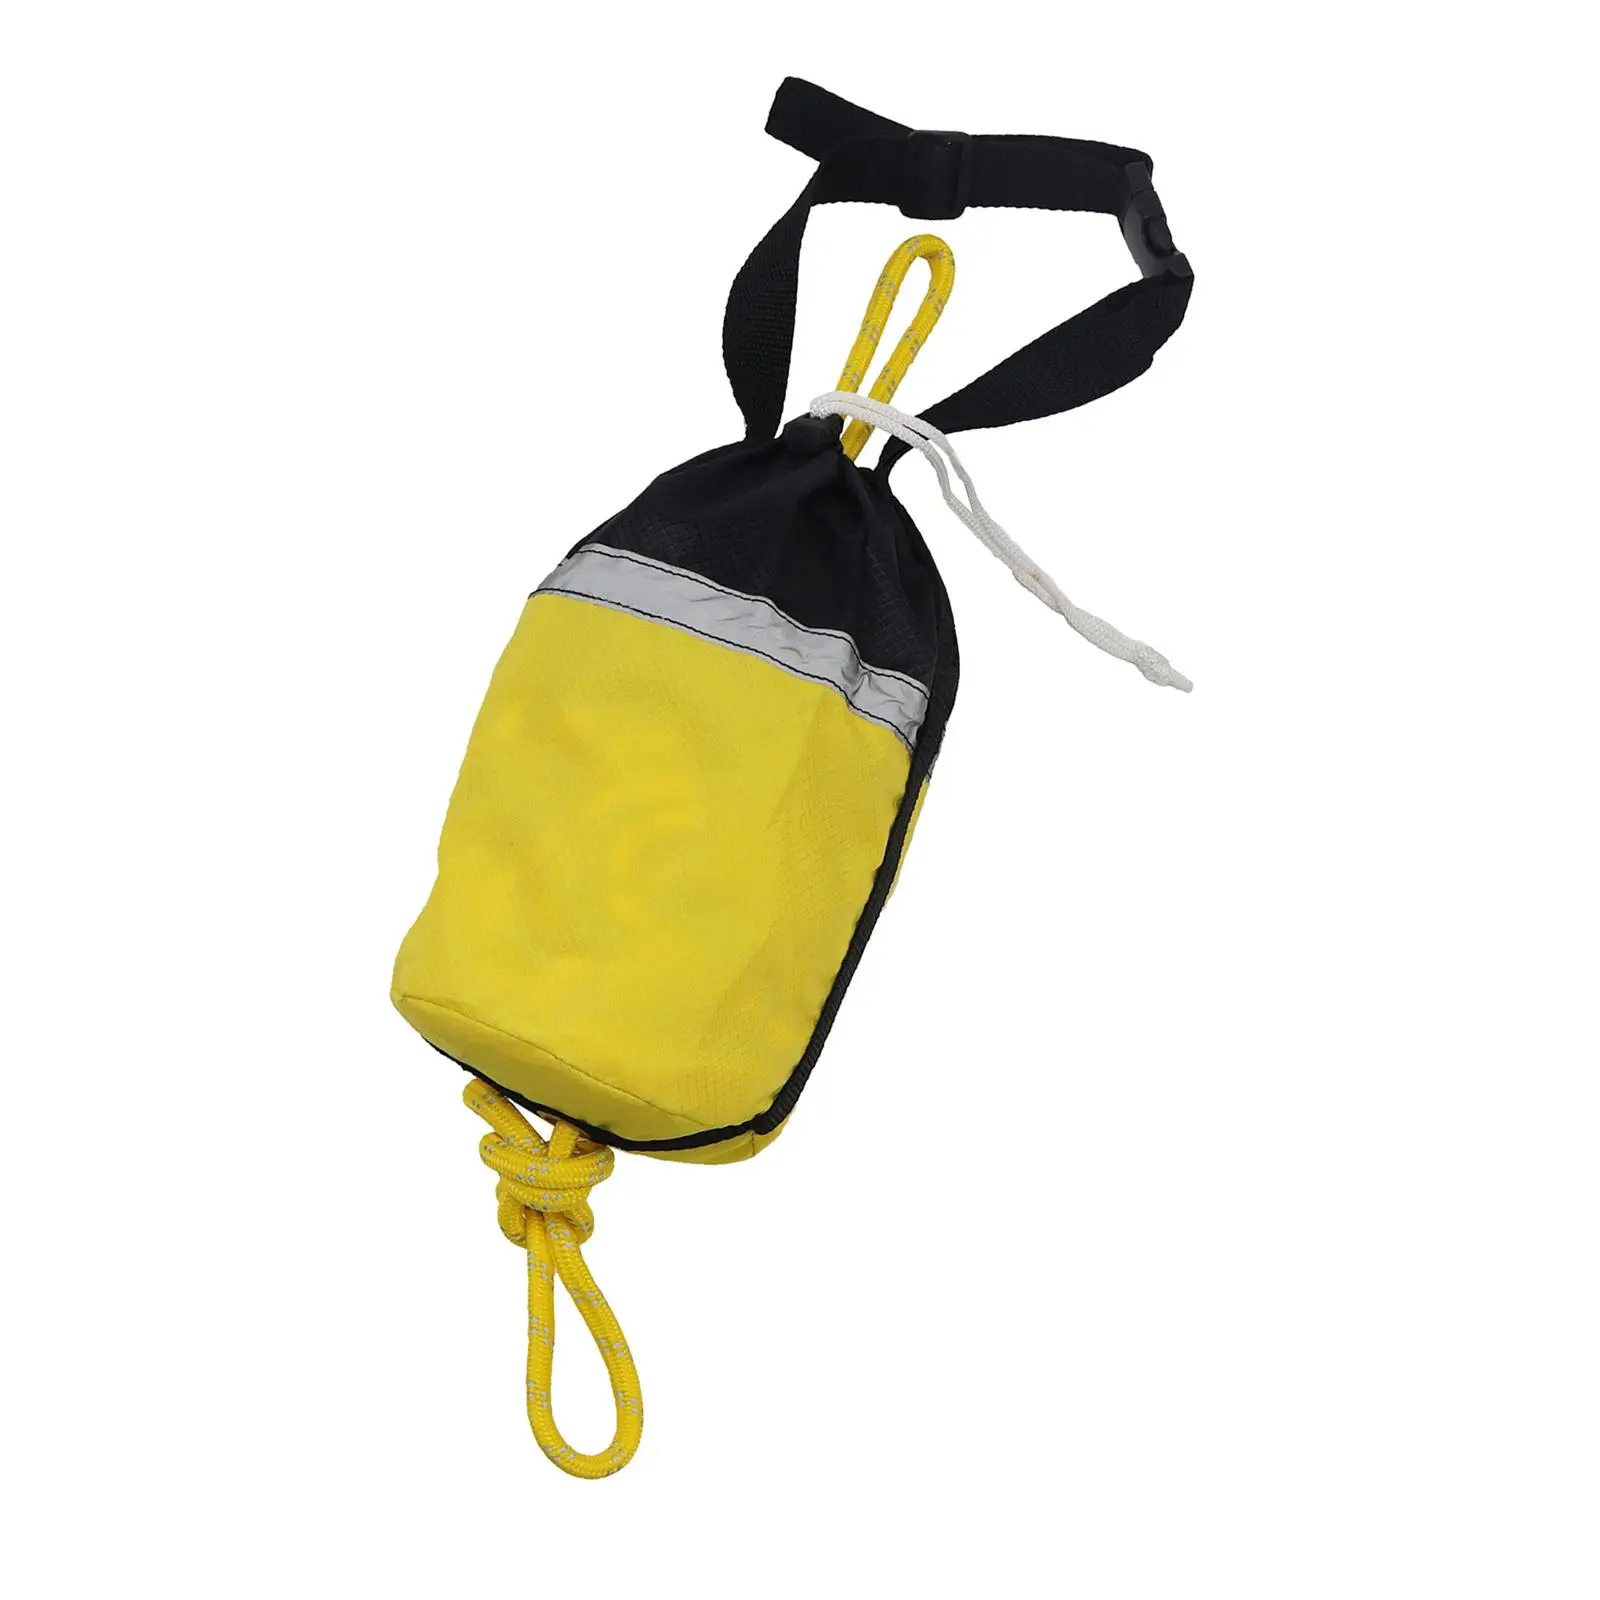 Kayak Throw Bag Marine High Visibility 16M Throw Rope for Boating Outdoor Accessory